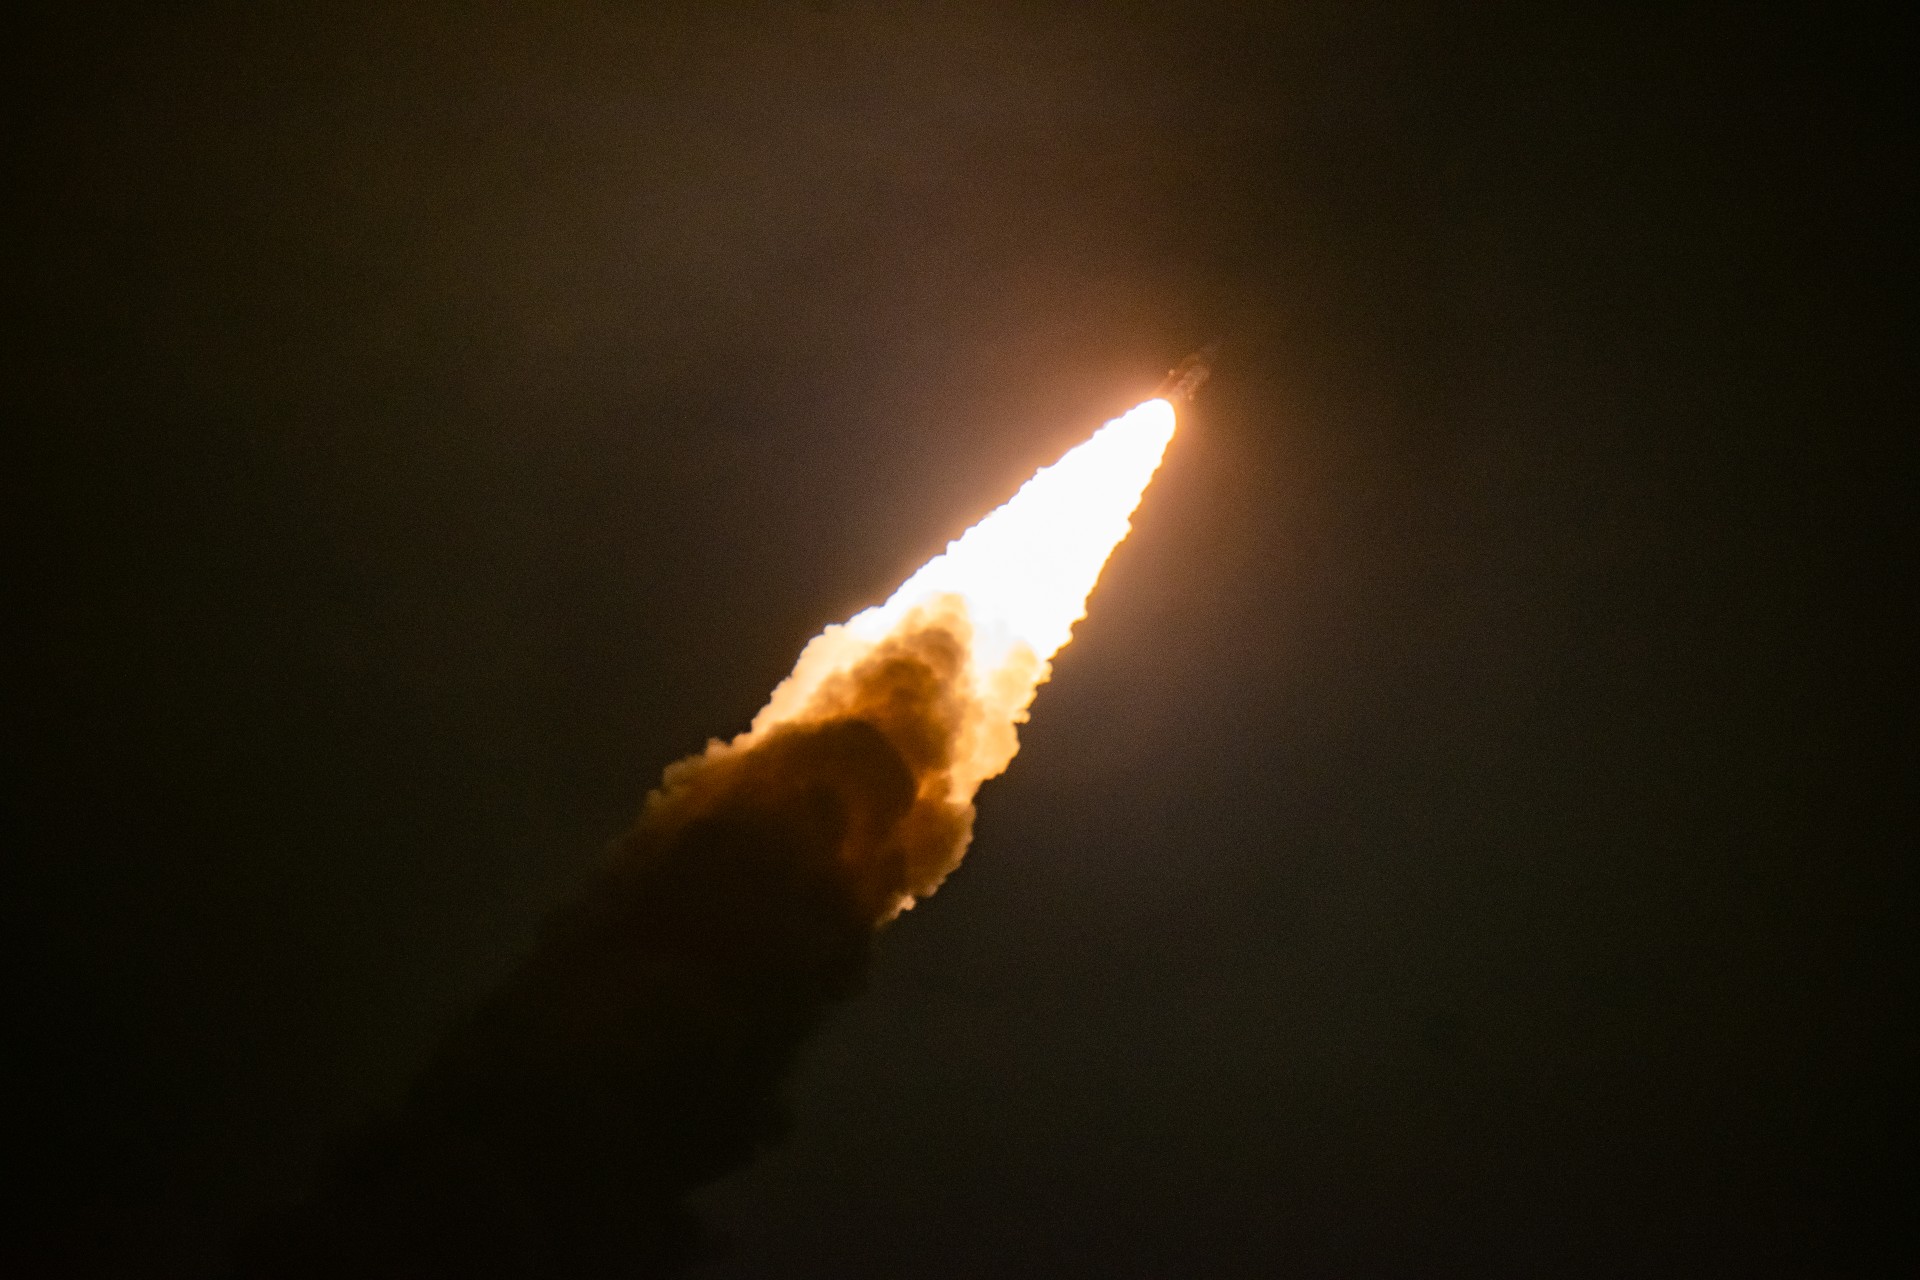 The Artemis 1 Space Launch System rocket heads towards deep space after liftoff.